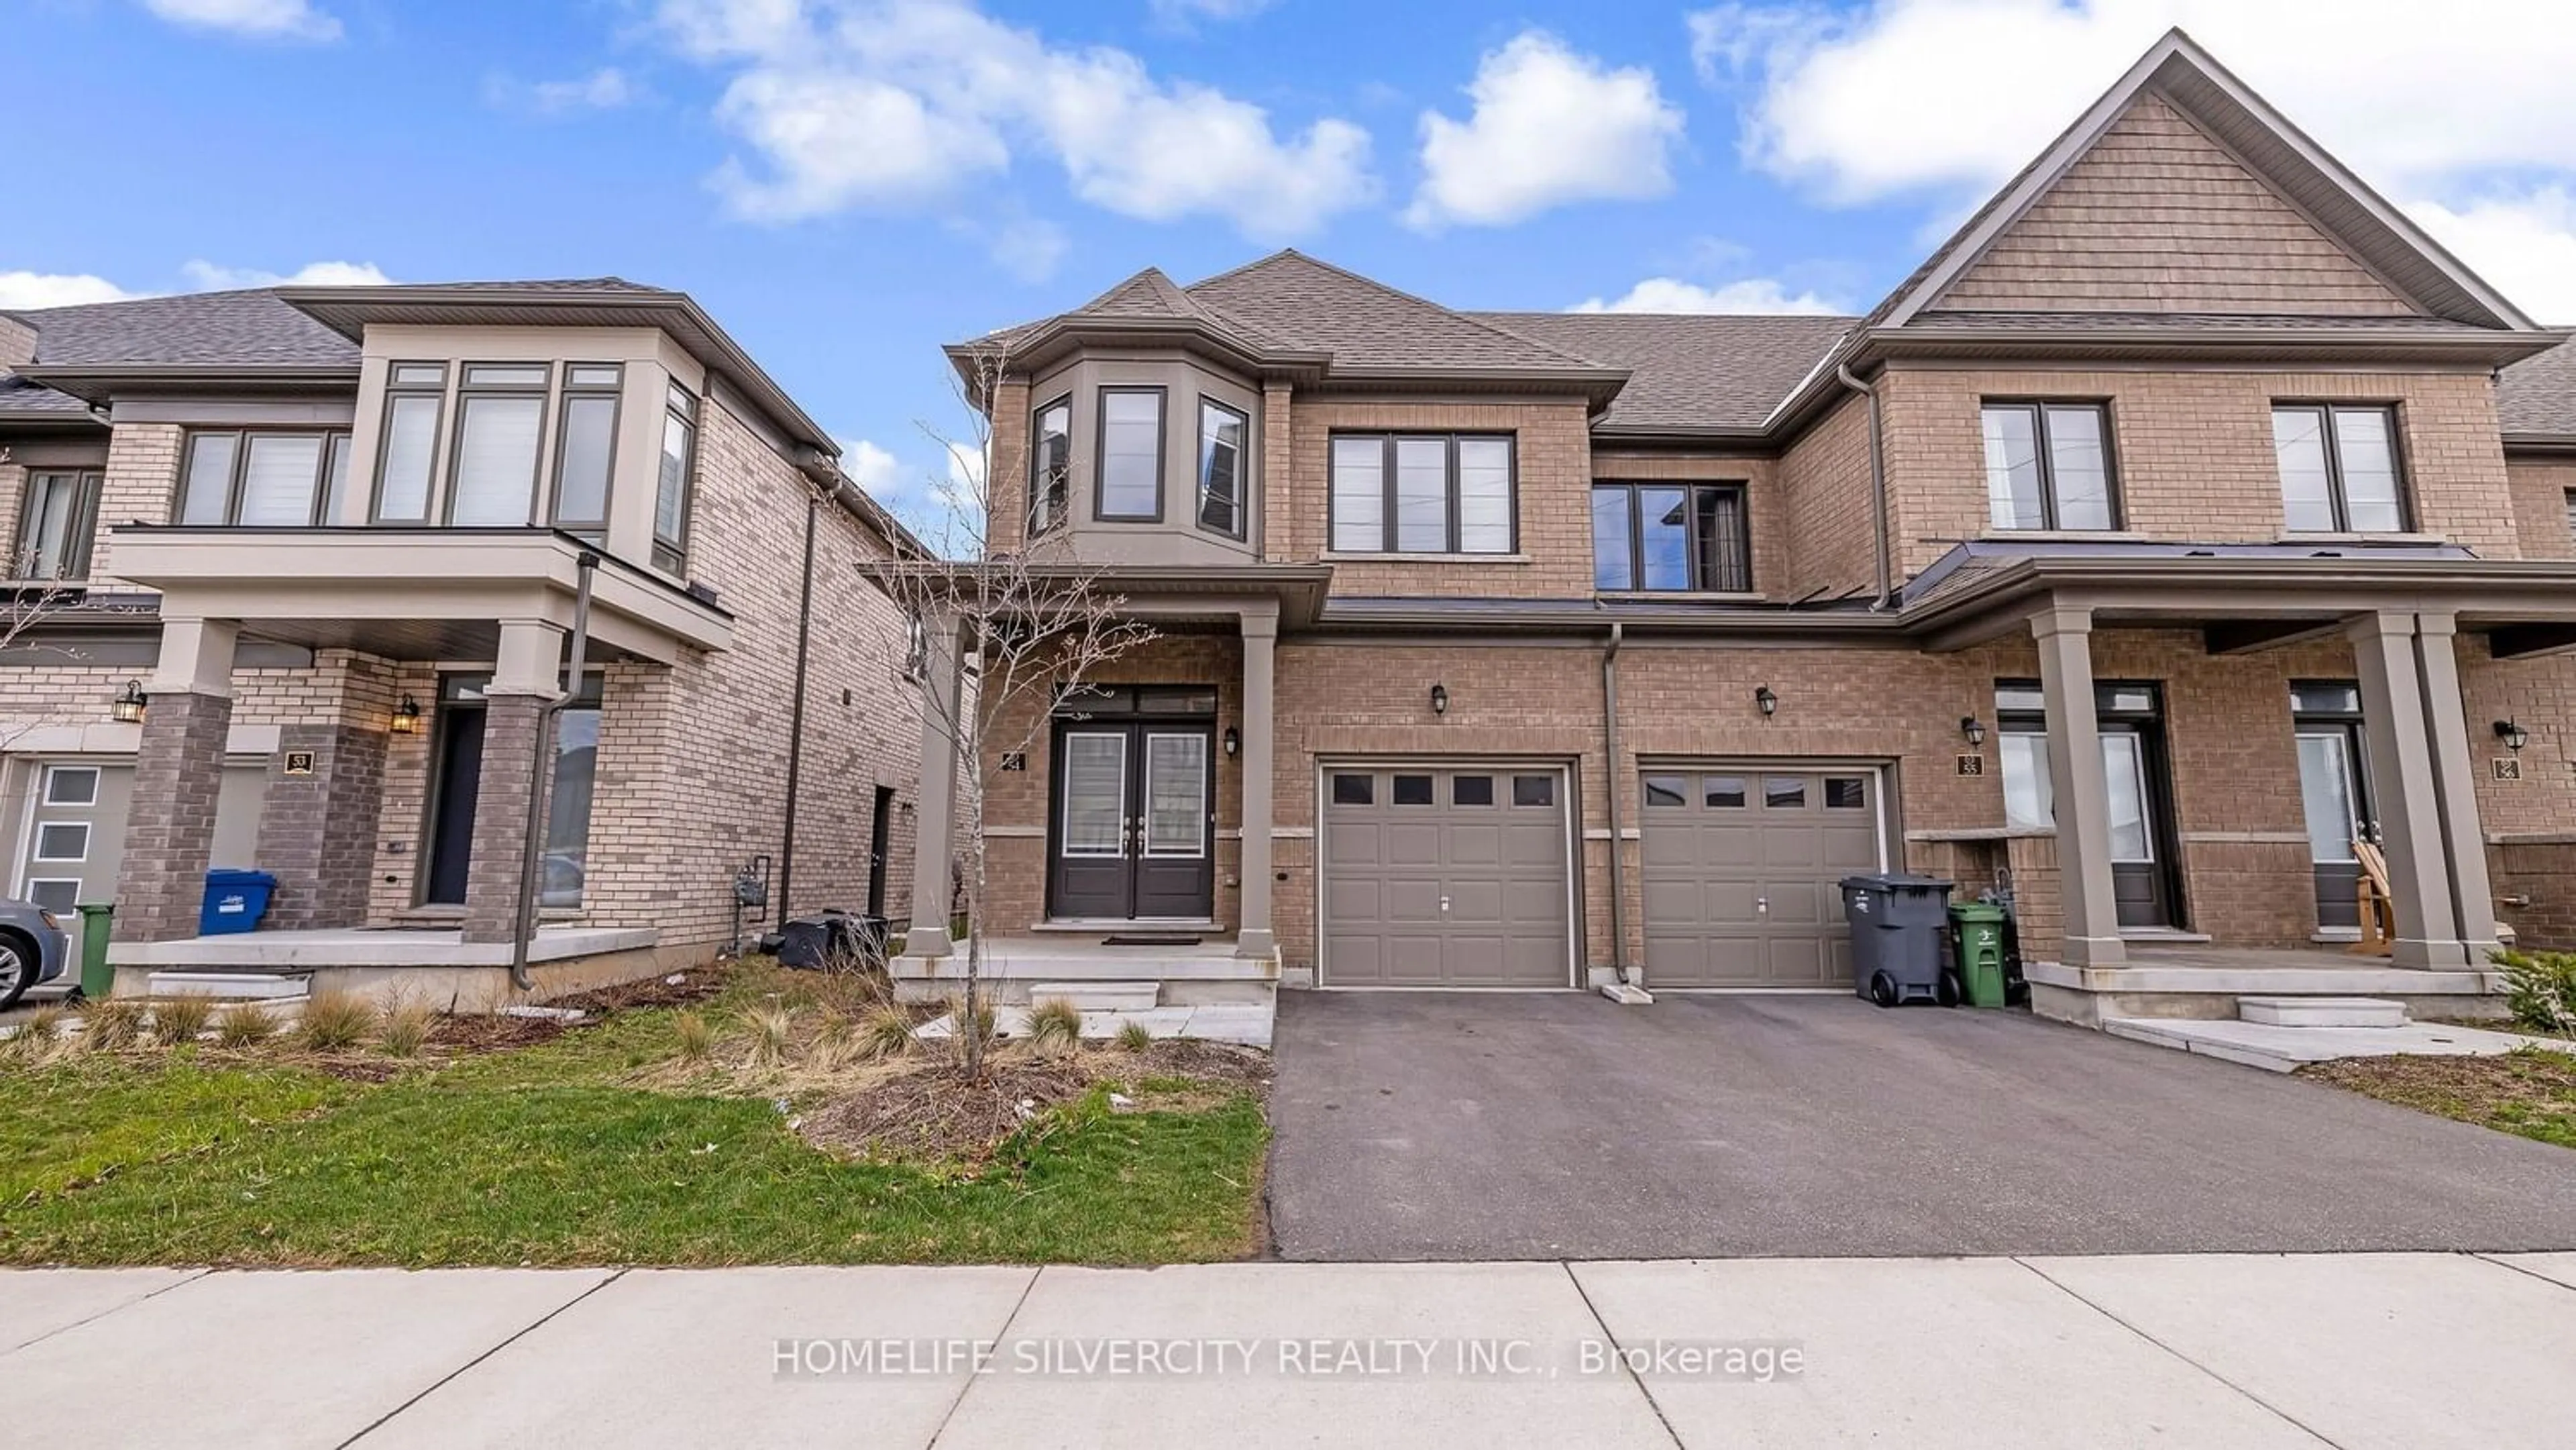 Frontside or backside of a home for 166 Deerpath Dr #54, Guelph Ontario N1K 1W6